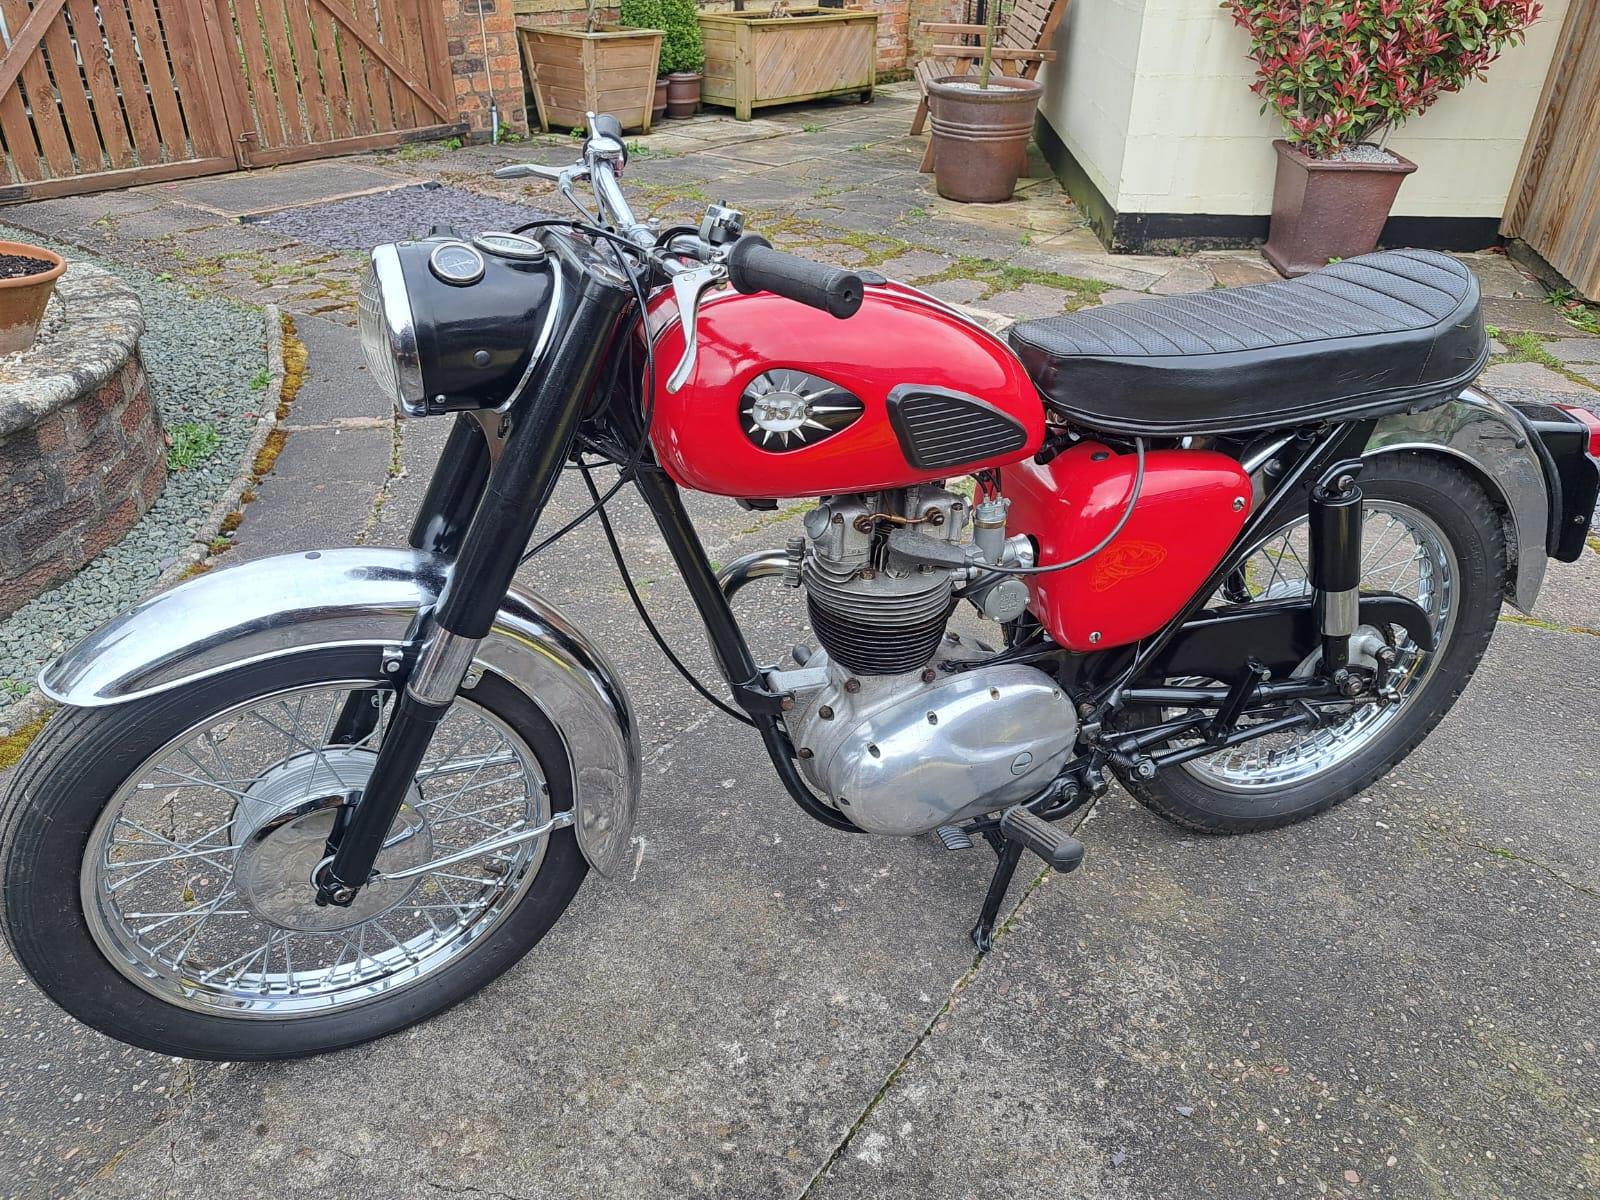 A 1963 BSA 350 MOTORCYCLE - ON A V5C, VENDOR STATES GOOD STARTER AND RUNNER, FROM A PRIVATE - Image 2 of 5